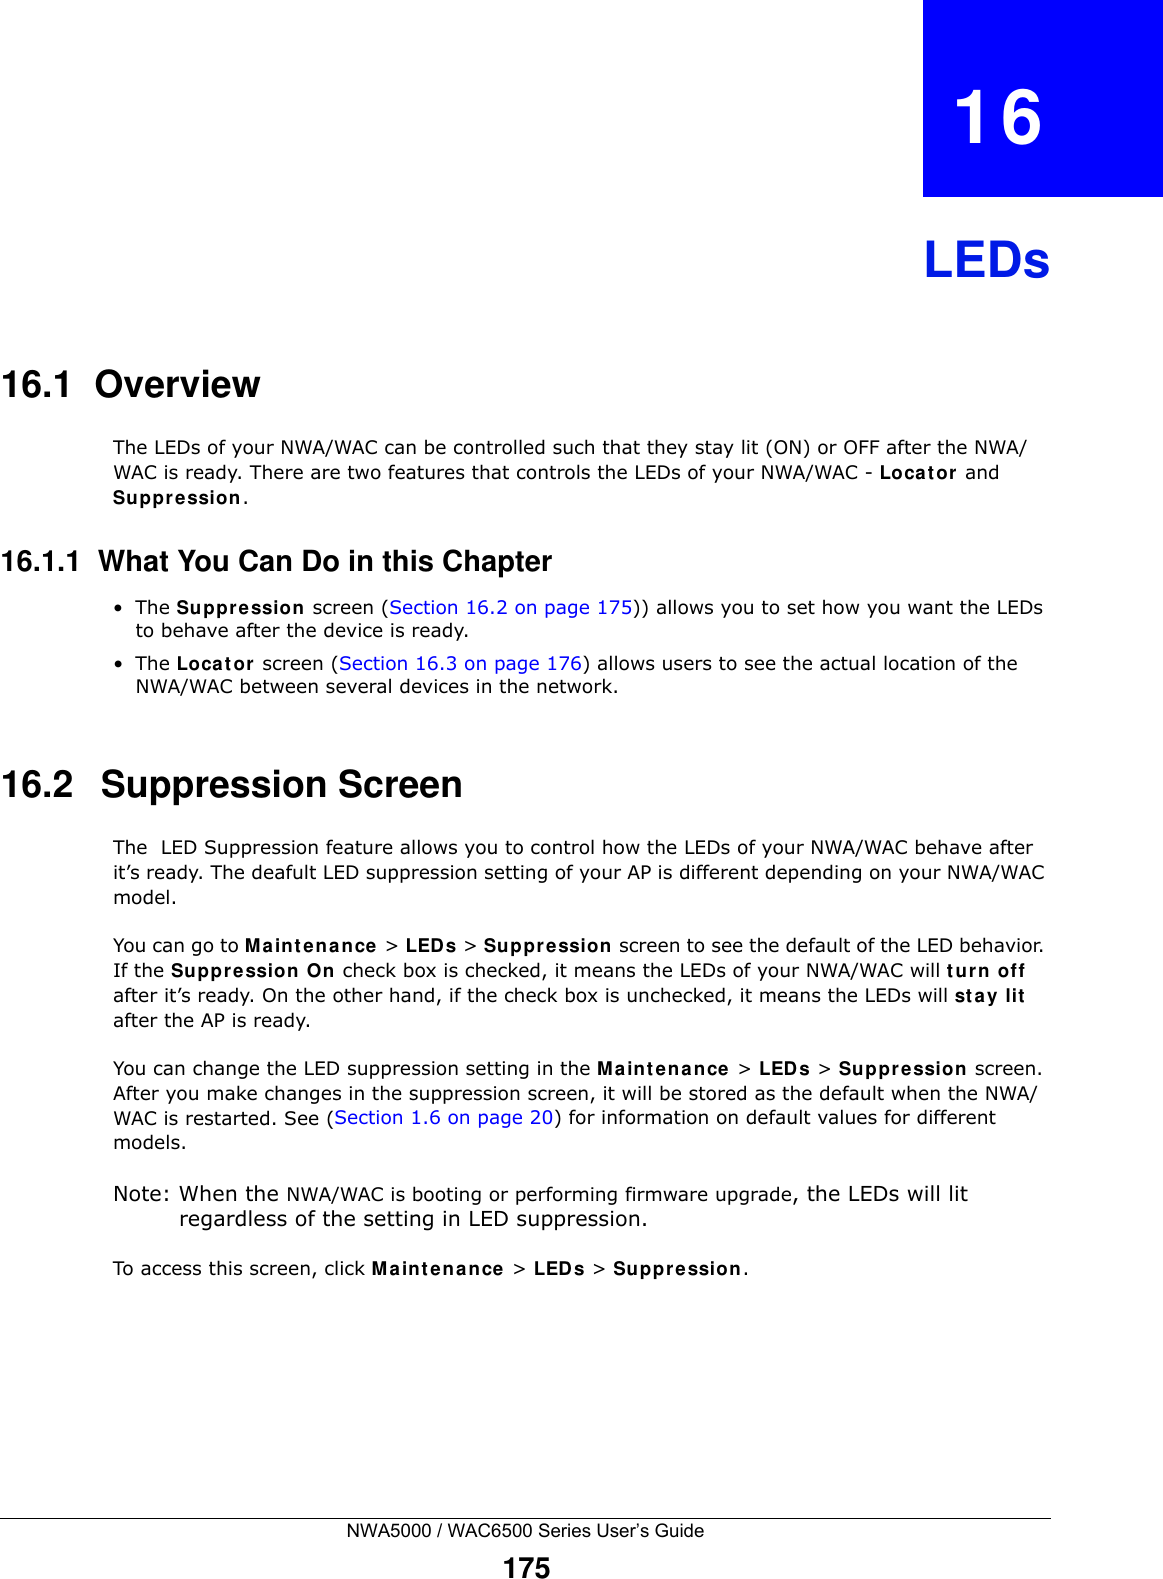 NWA5000 / WAC6500 Series User’s Guide175CHAPTER   16LEDs16.1  OverviewThe LEDs of your NWA/WAC can be controlled such that they stay lit (ON) or OFF after the NWA/WAC is ready. There are two features that controls the LEDs of your NWA/WAC - Loca t or  and Suppression.16.1.1  What You Can Do in this Chapter•The Suppression screen (Section 16.2 on page 175)) allows you to set how you want the LEDs to behave after the device is ready. •The Loca t or  screen (Section 16.3 on page 176) allows users to see the actual location of the NWA/WAC between several devices in the network.16.2   Suppression Screen The  LED Suppression feature allows you to control how the LEDs of your NWA/WAC behave after it’s ready. The deafult LED suppression setting of your AP is different depending on your NWA/WAC model. You can go to M a in t ena nce  &gt; LED s &gt; Suppre ssion screen to see the default of the LED behavior. If the Suppre ssion On check box is checked, it means the LEDs of your NWA/WAC will tur n off after it’s ready. On the other hand, if the check box is unchecked, it means the LEDs will st a y lit after the AP is ready. You can change the LED suppression setting in the M ain t e na nce  &gt; LED s &gt; Suppression screen. After you make changes in the suppression screen, it will be stored as the default when the NWA/WAC is restarted. See (Section 1.6 on page 20) for information on default values for different models.Note: When the NWA/WAC is booting or performing firmware upgrade, the LEDs will lit regardless of the setting in LED suppression.To access this screen, click M a in t e na nce  &gt; LED s &gt; Suppression.